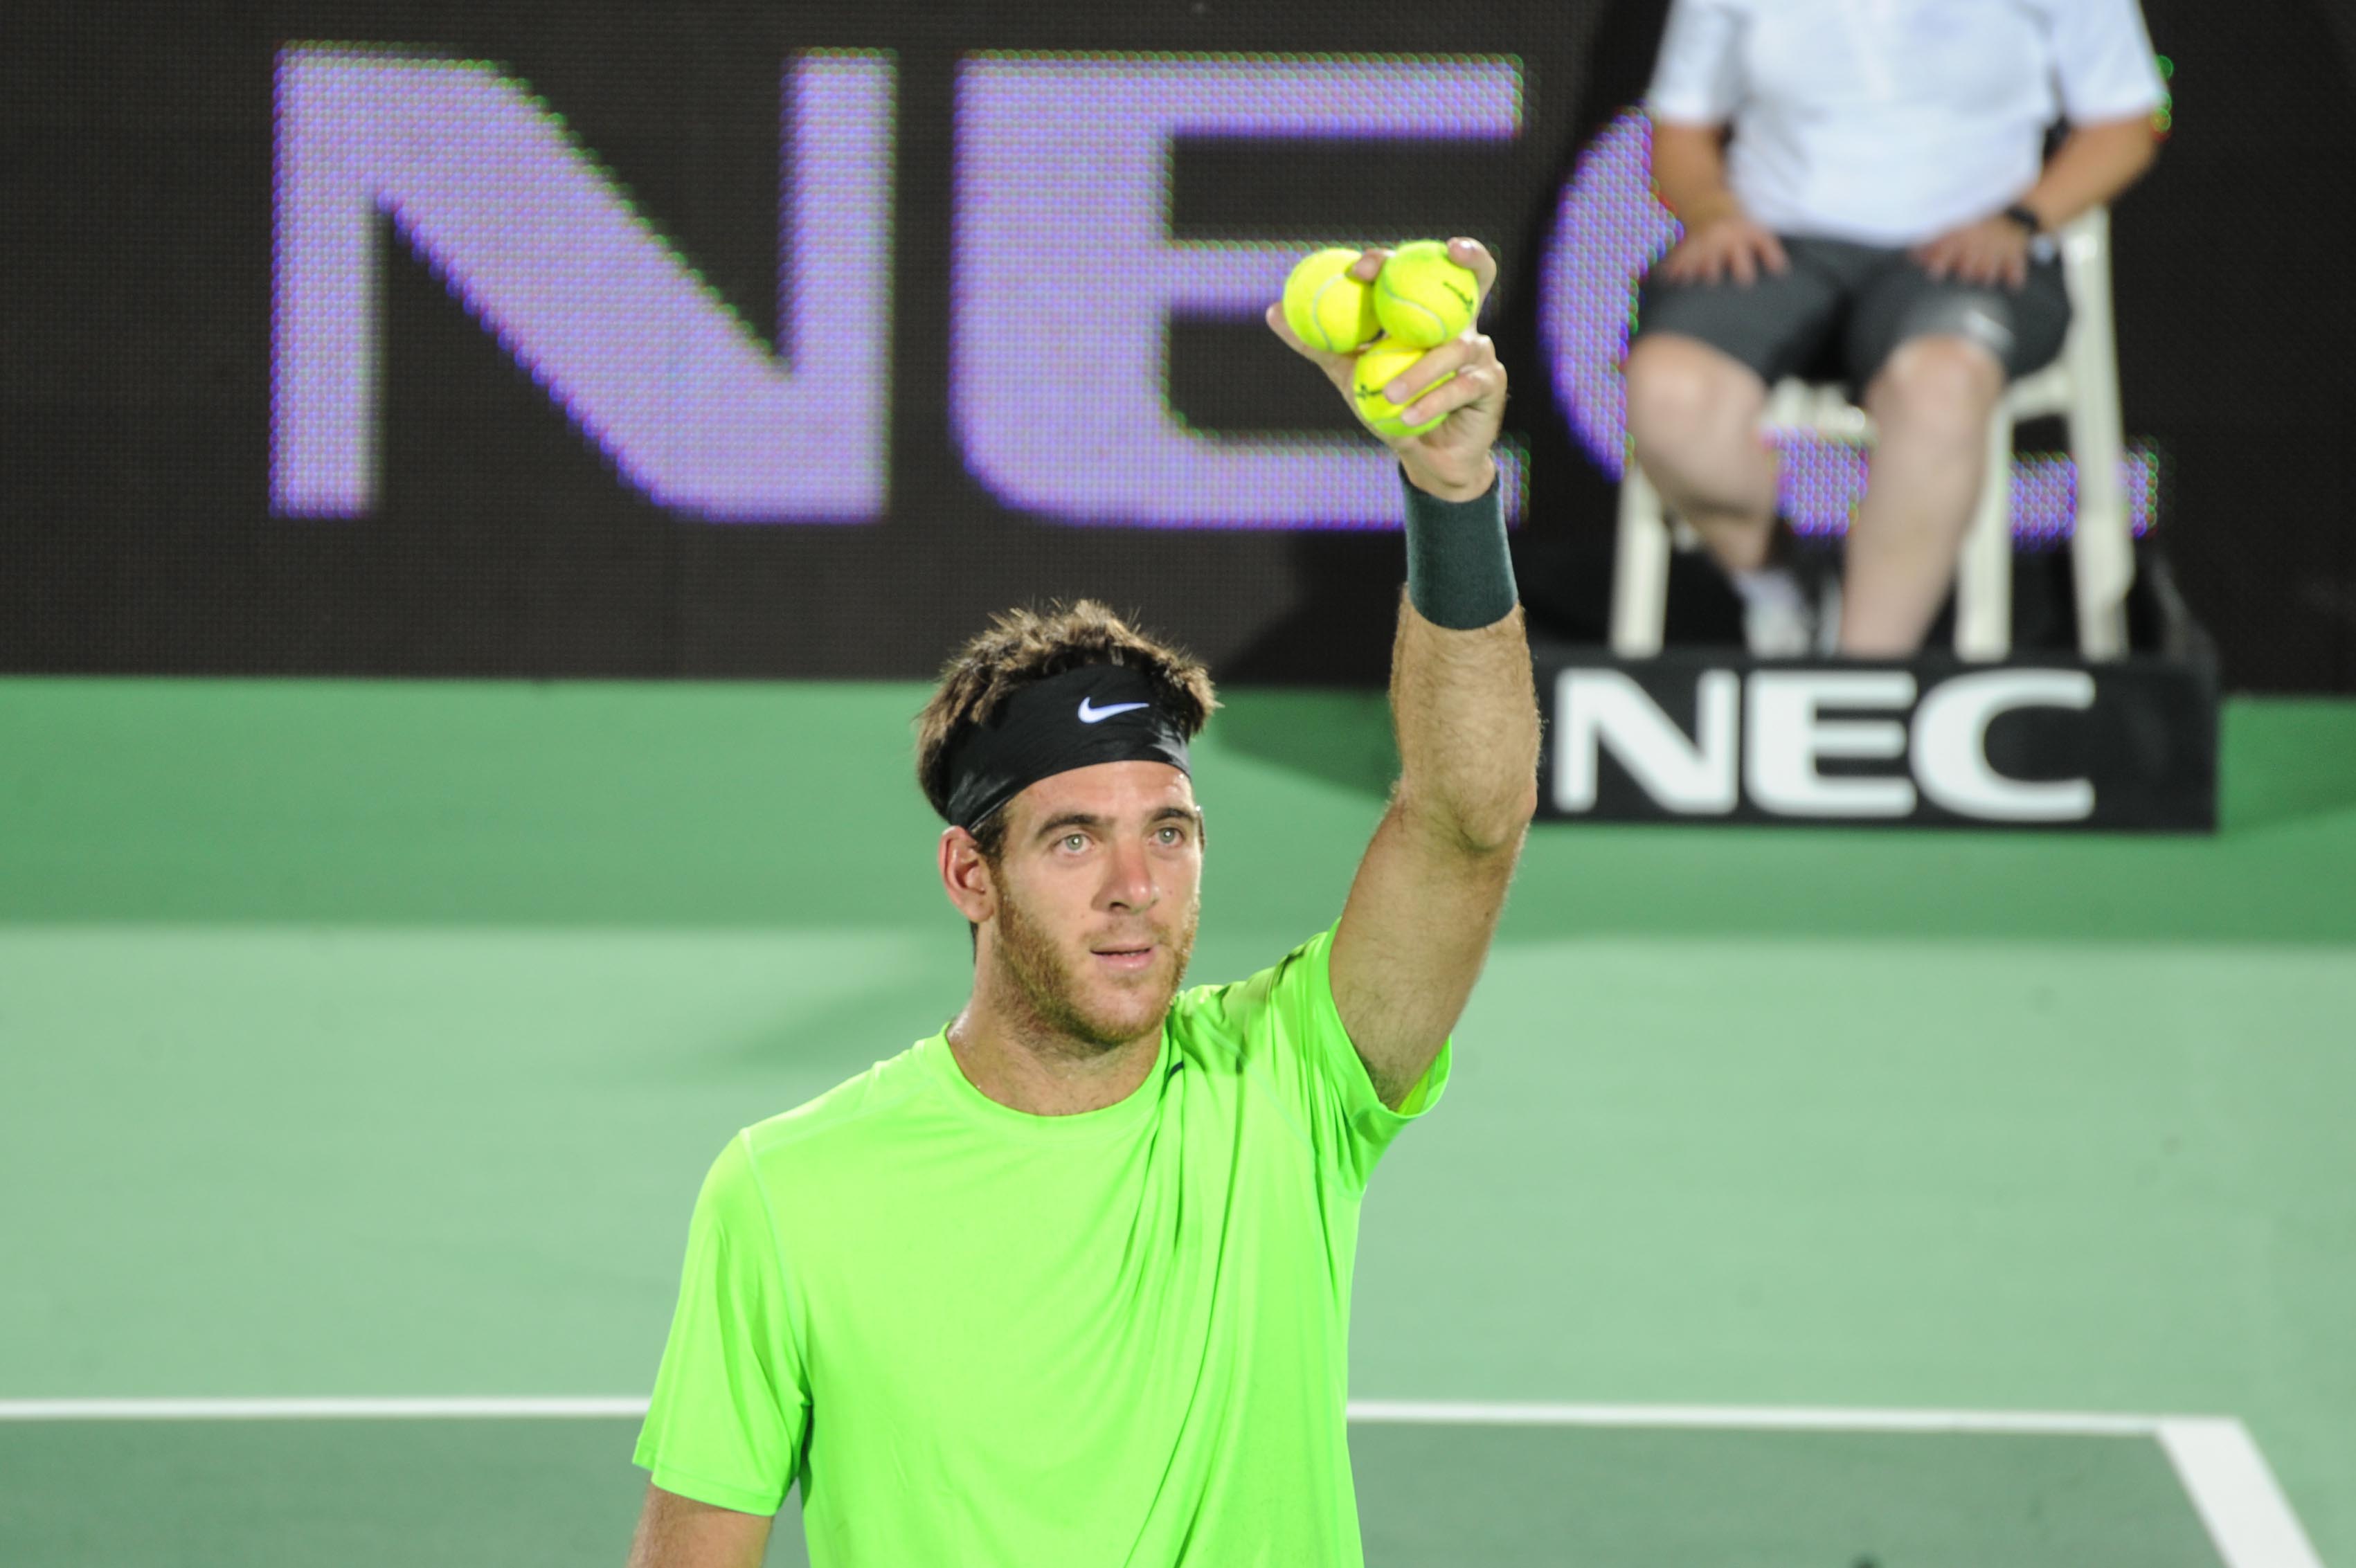 Tennis-Del Potro out of Wimbledon after re-fracturing kneecap